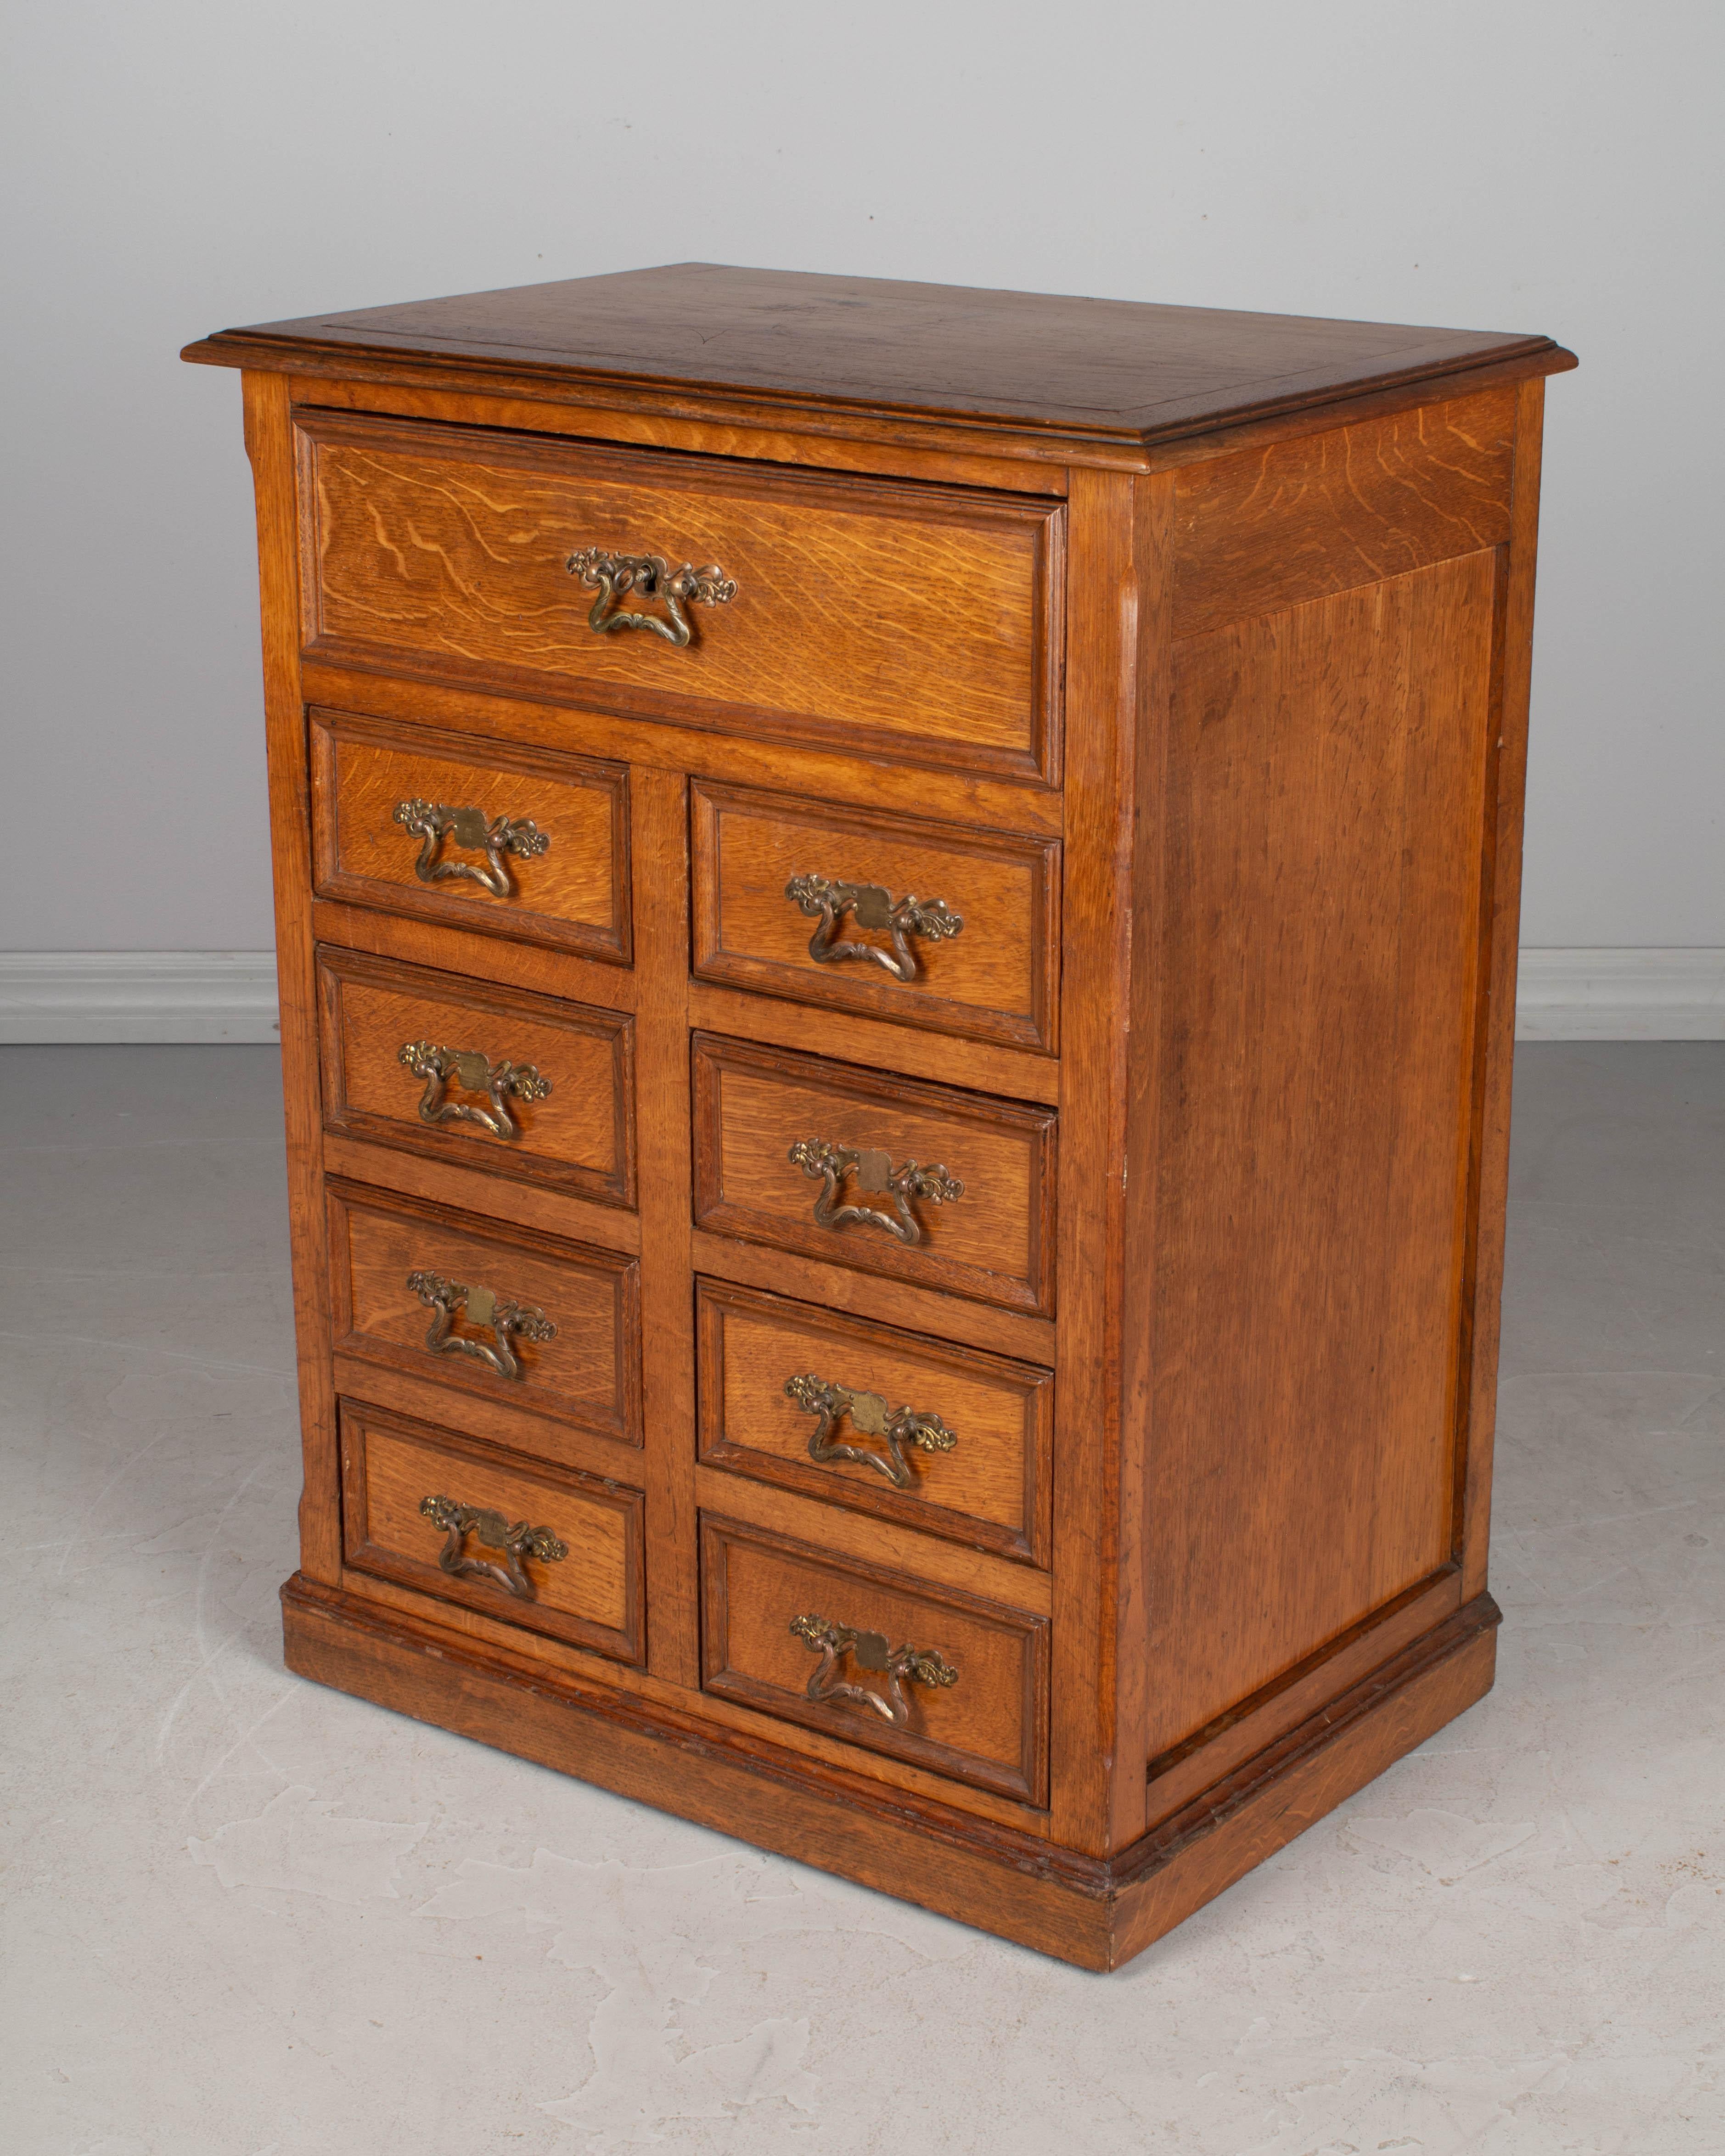 A small French meuble de métier, or industrial cabinet, made of solid oak. Nine dovetailed drawers with working locking system. The large top drawer has a key that locks the eight smaller drawers. Original Art Nouveau style cast brass hardware. A